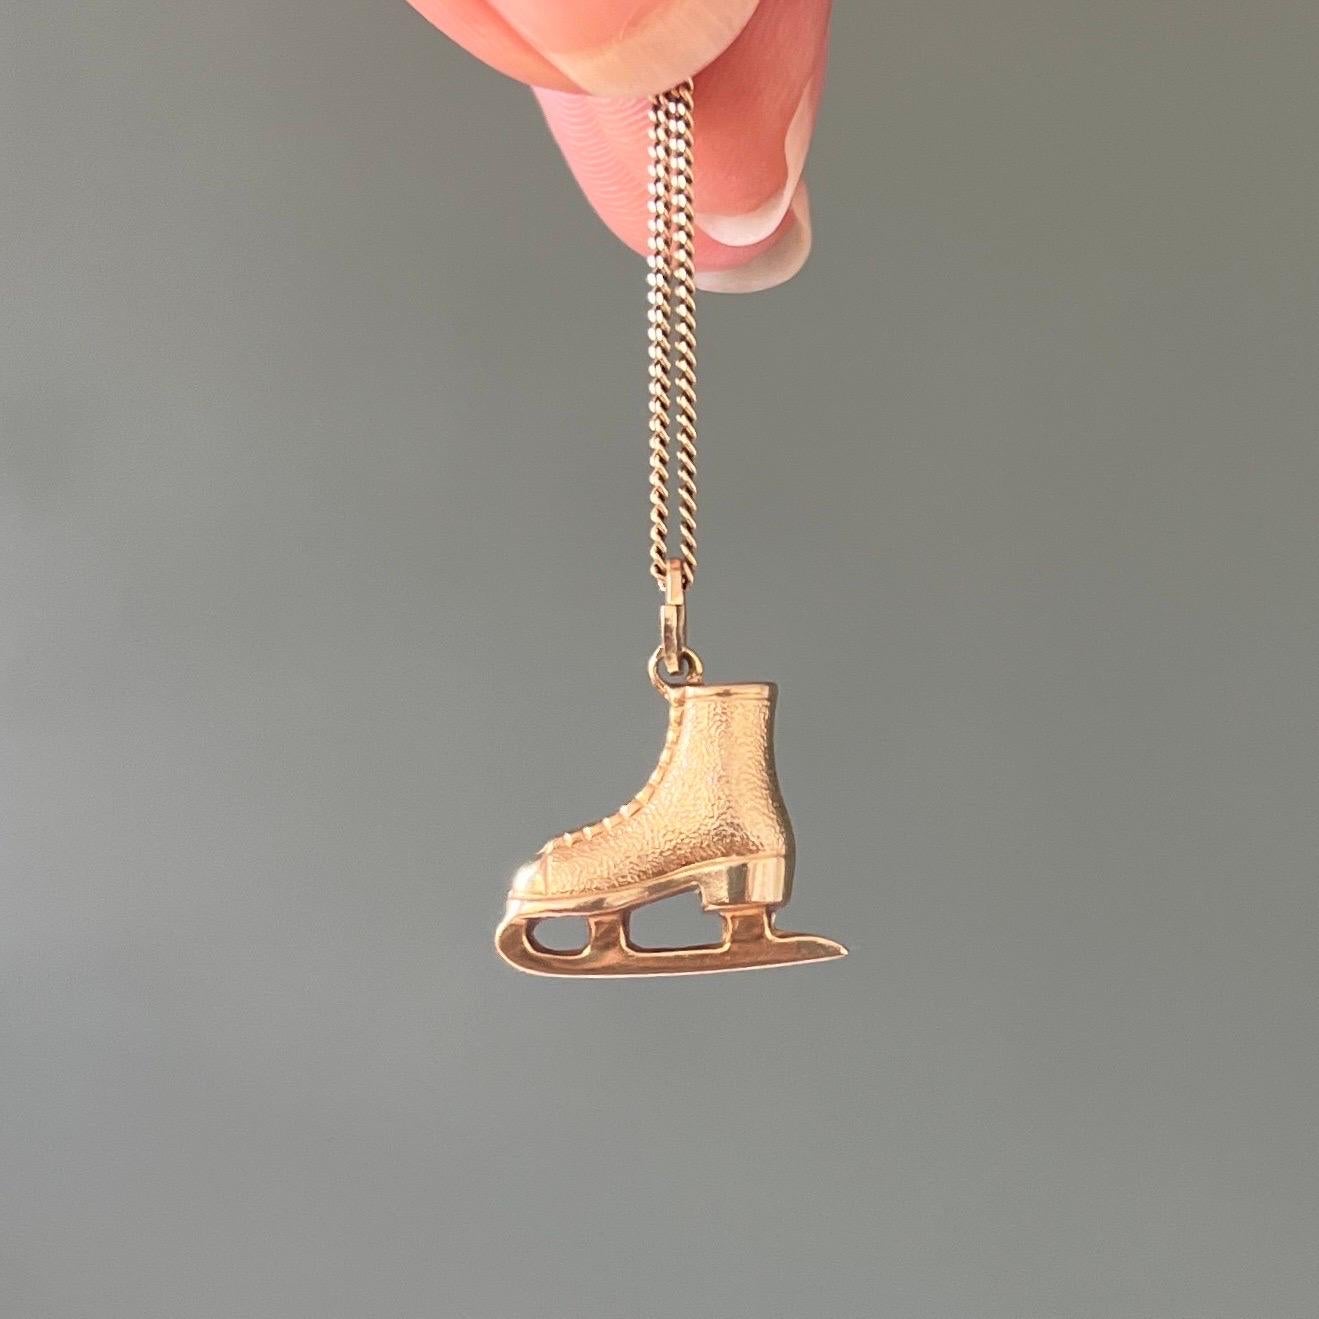 A beautiful vintage stylized figure ice skating shoe charm pendant made in 14 karat gold. The ice skating shoe is nicely detailed with shoelace, blade and heel. The figure skate shoe features a light brushed gold finish. 

The great thing about